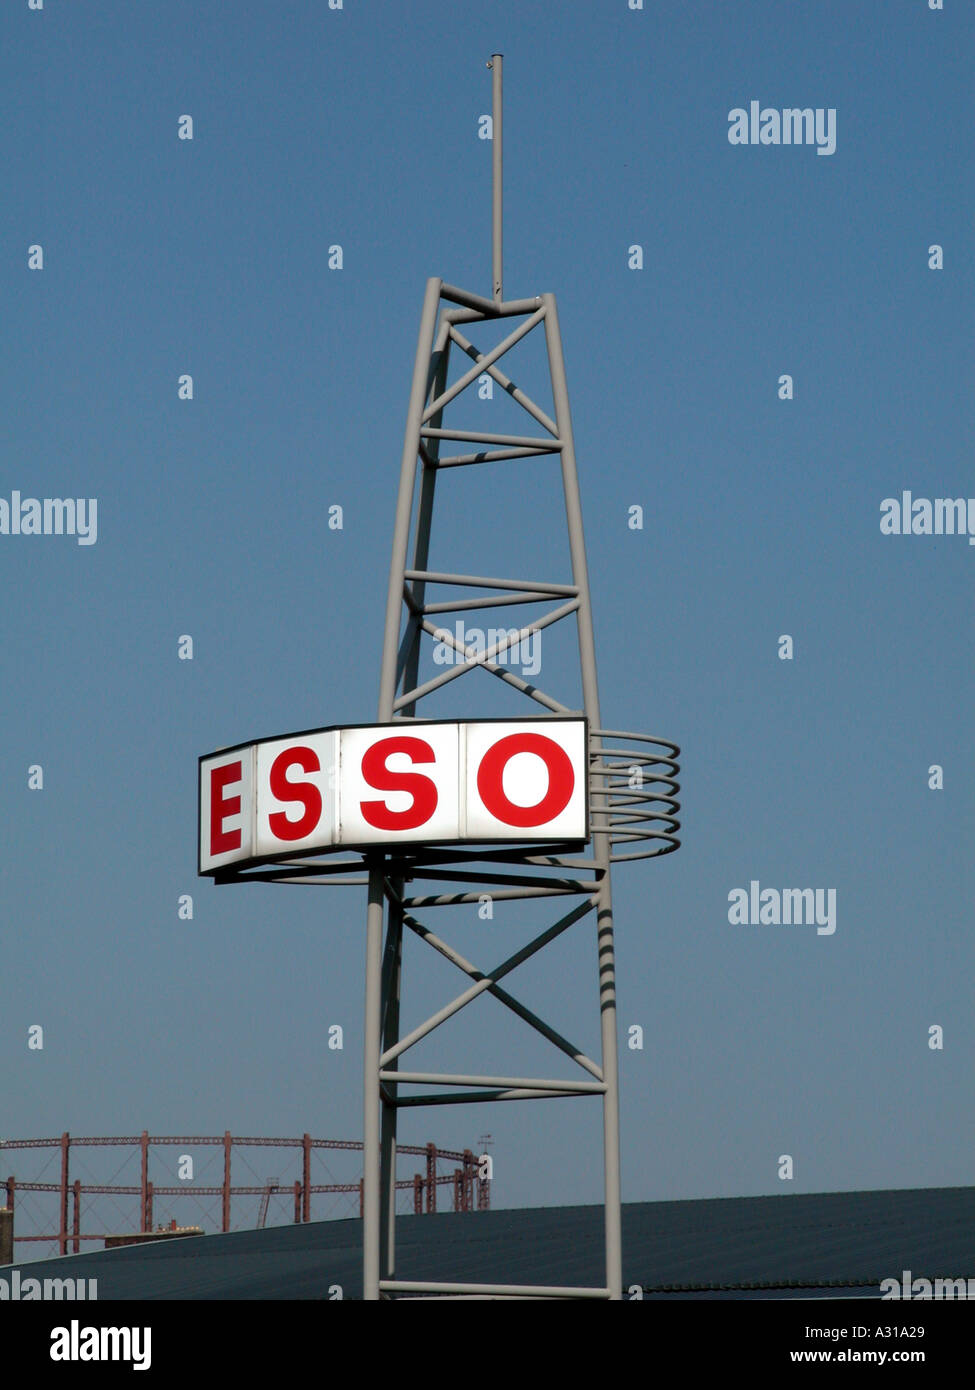 Esso Petrol Station corporate branding sign, East London, 2002. Stock Photo